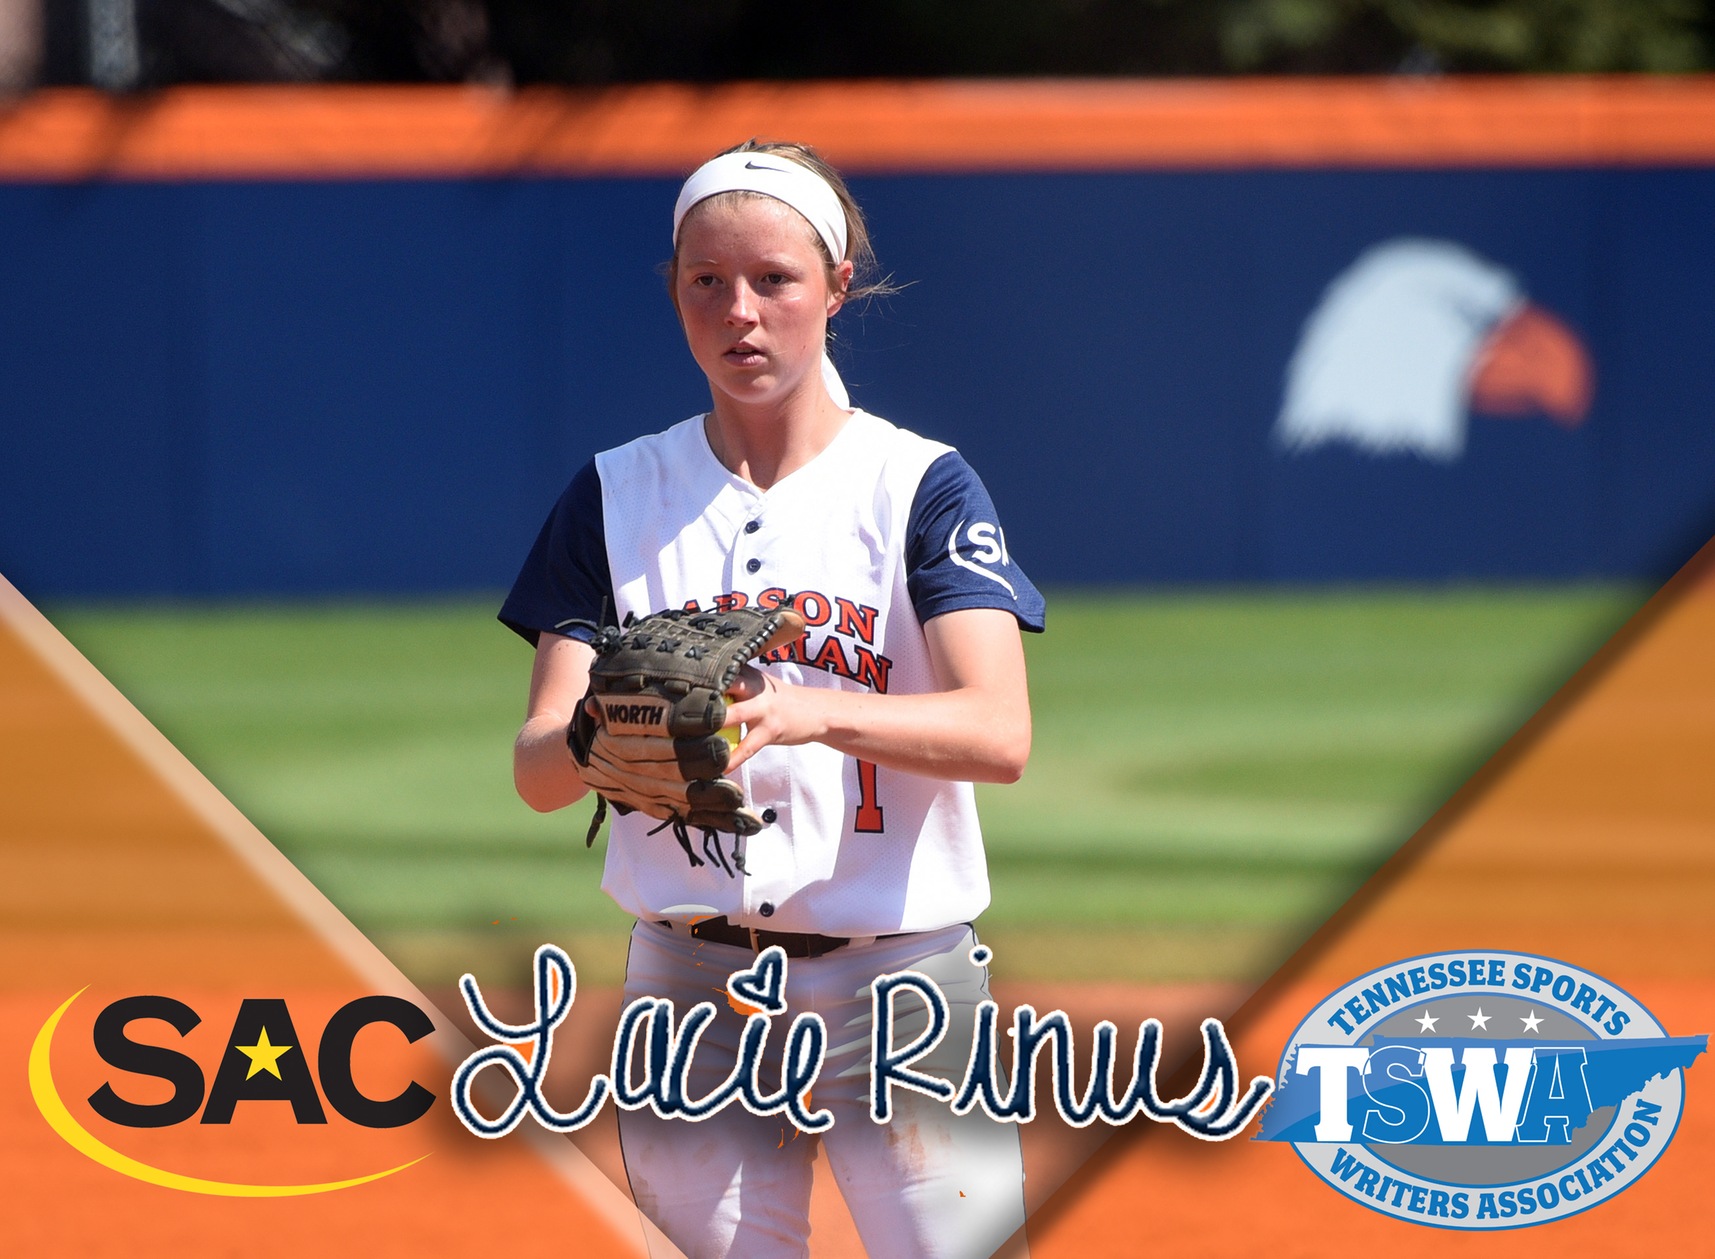 Rinus ropes in weekly honors from SAC, TSWA